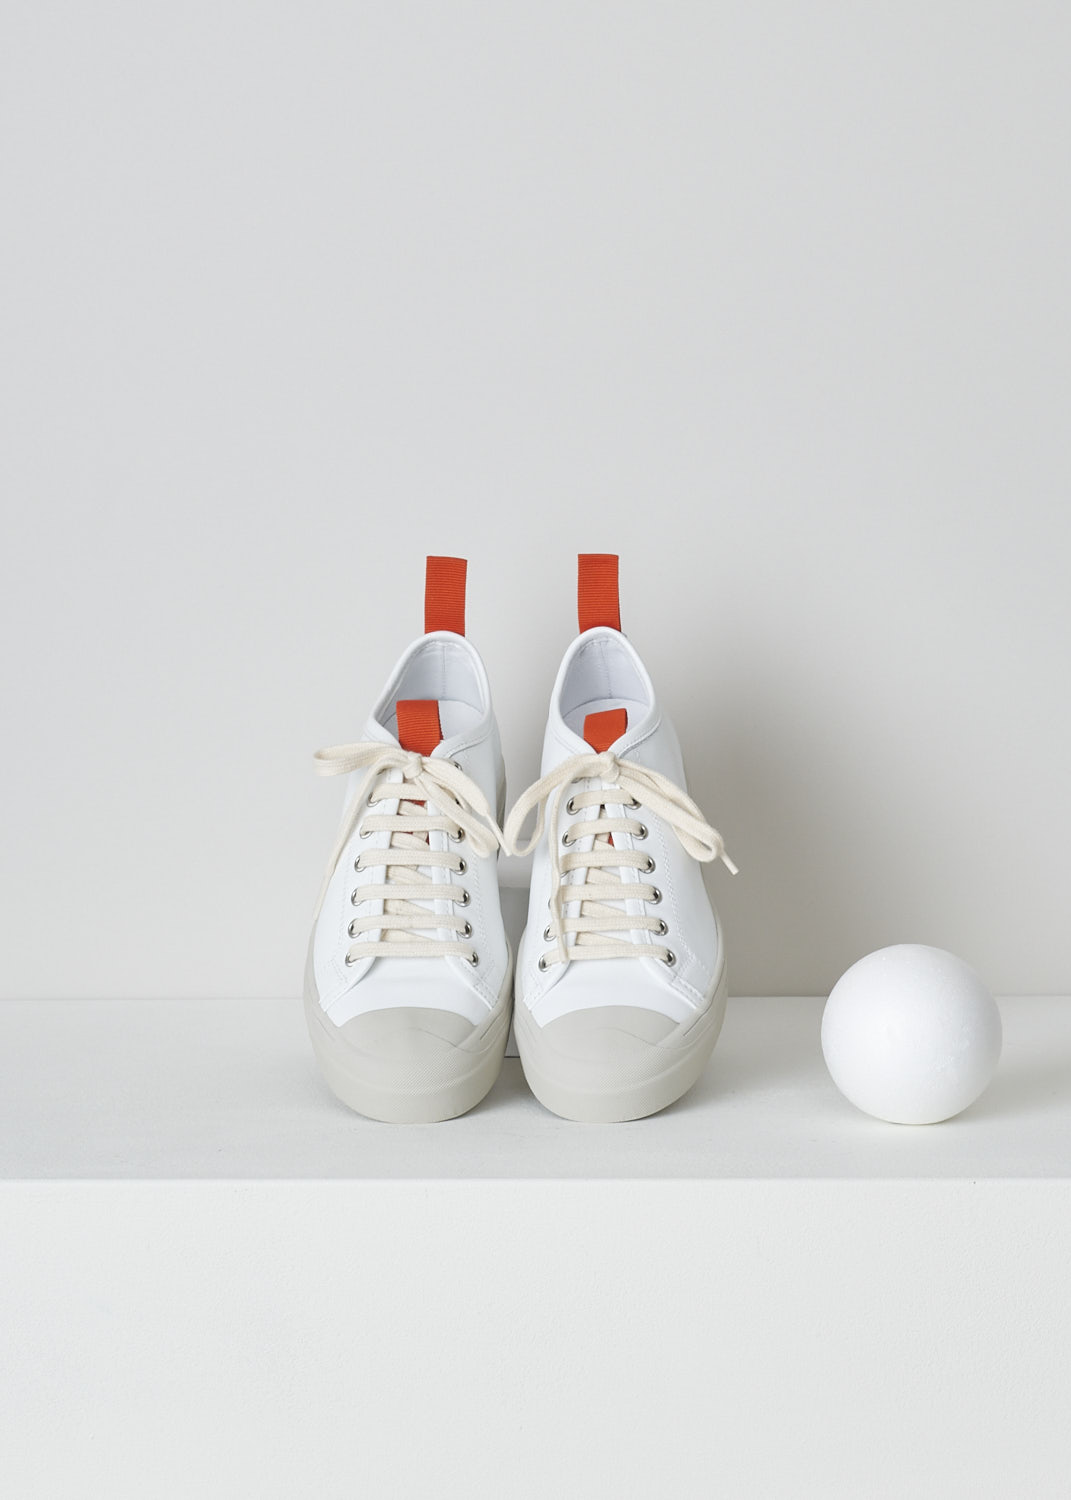 SOFIE Dâ€™HOORE, WHITE LEATHER SNEAKERS WITH RED ACCENTS, FABLE_LCOL_WHCL, White, Top, These white leather sneakers feature a front lace-up closure with white laces. Red pull-tabs can be found on the back of the heel and on the front of the tongue. These sneakers have a round toe with a beige rubber toe cap that goes down into the rubber sole in that same beige color. 

